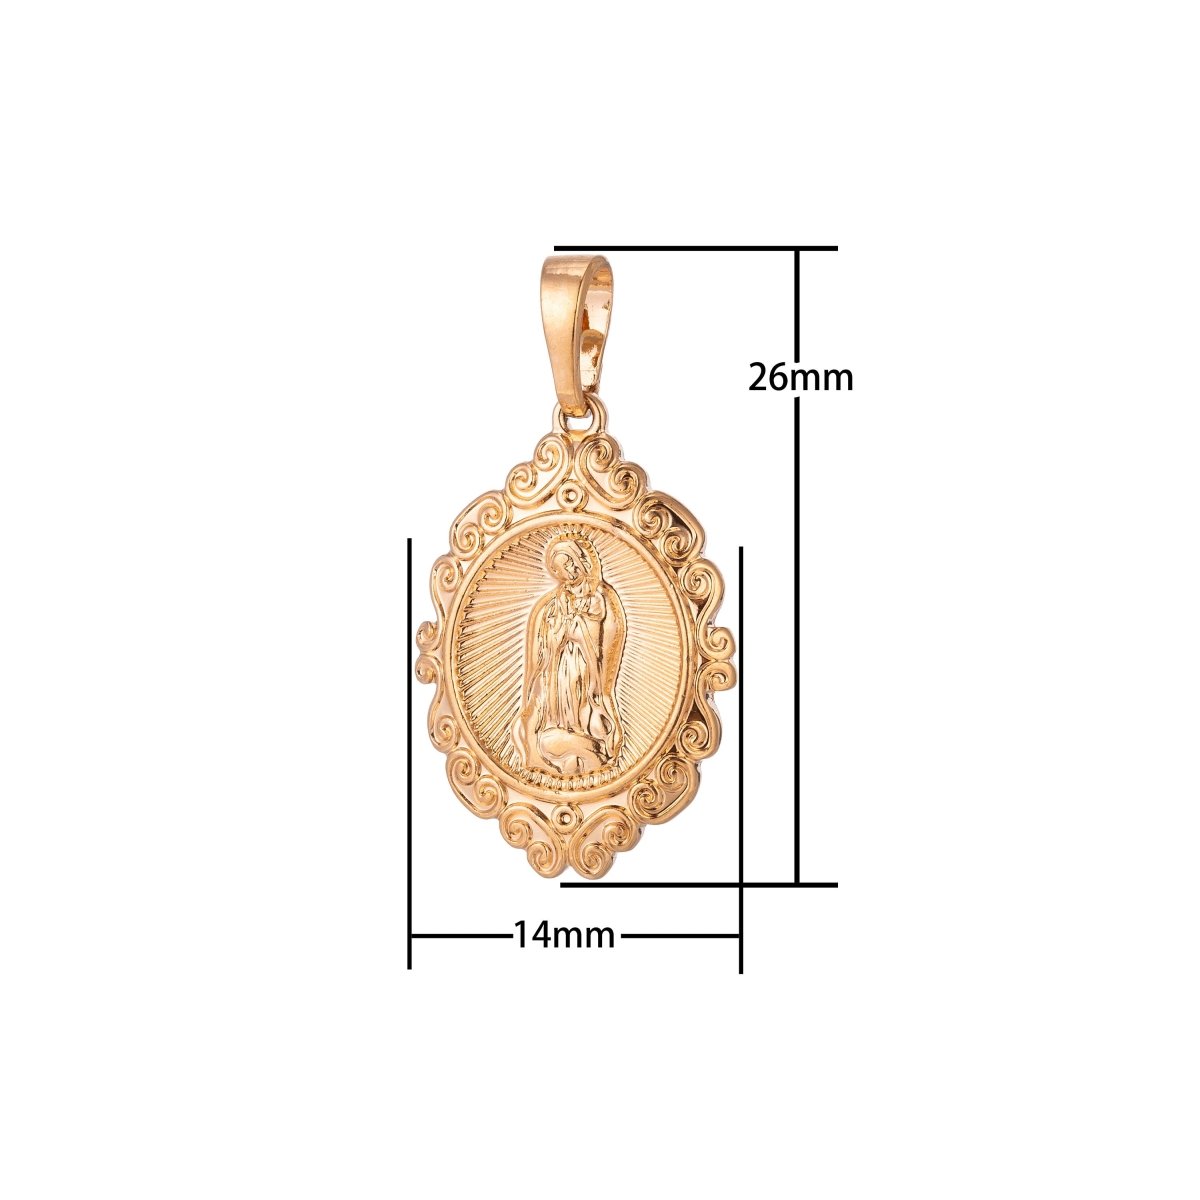 Virgin Mary Charm, 18K Gold Filled Pendant Dainty Virgen de Guadalupe Necklace Charm for Jewelry Making H-870 - DLUXCA